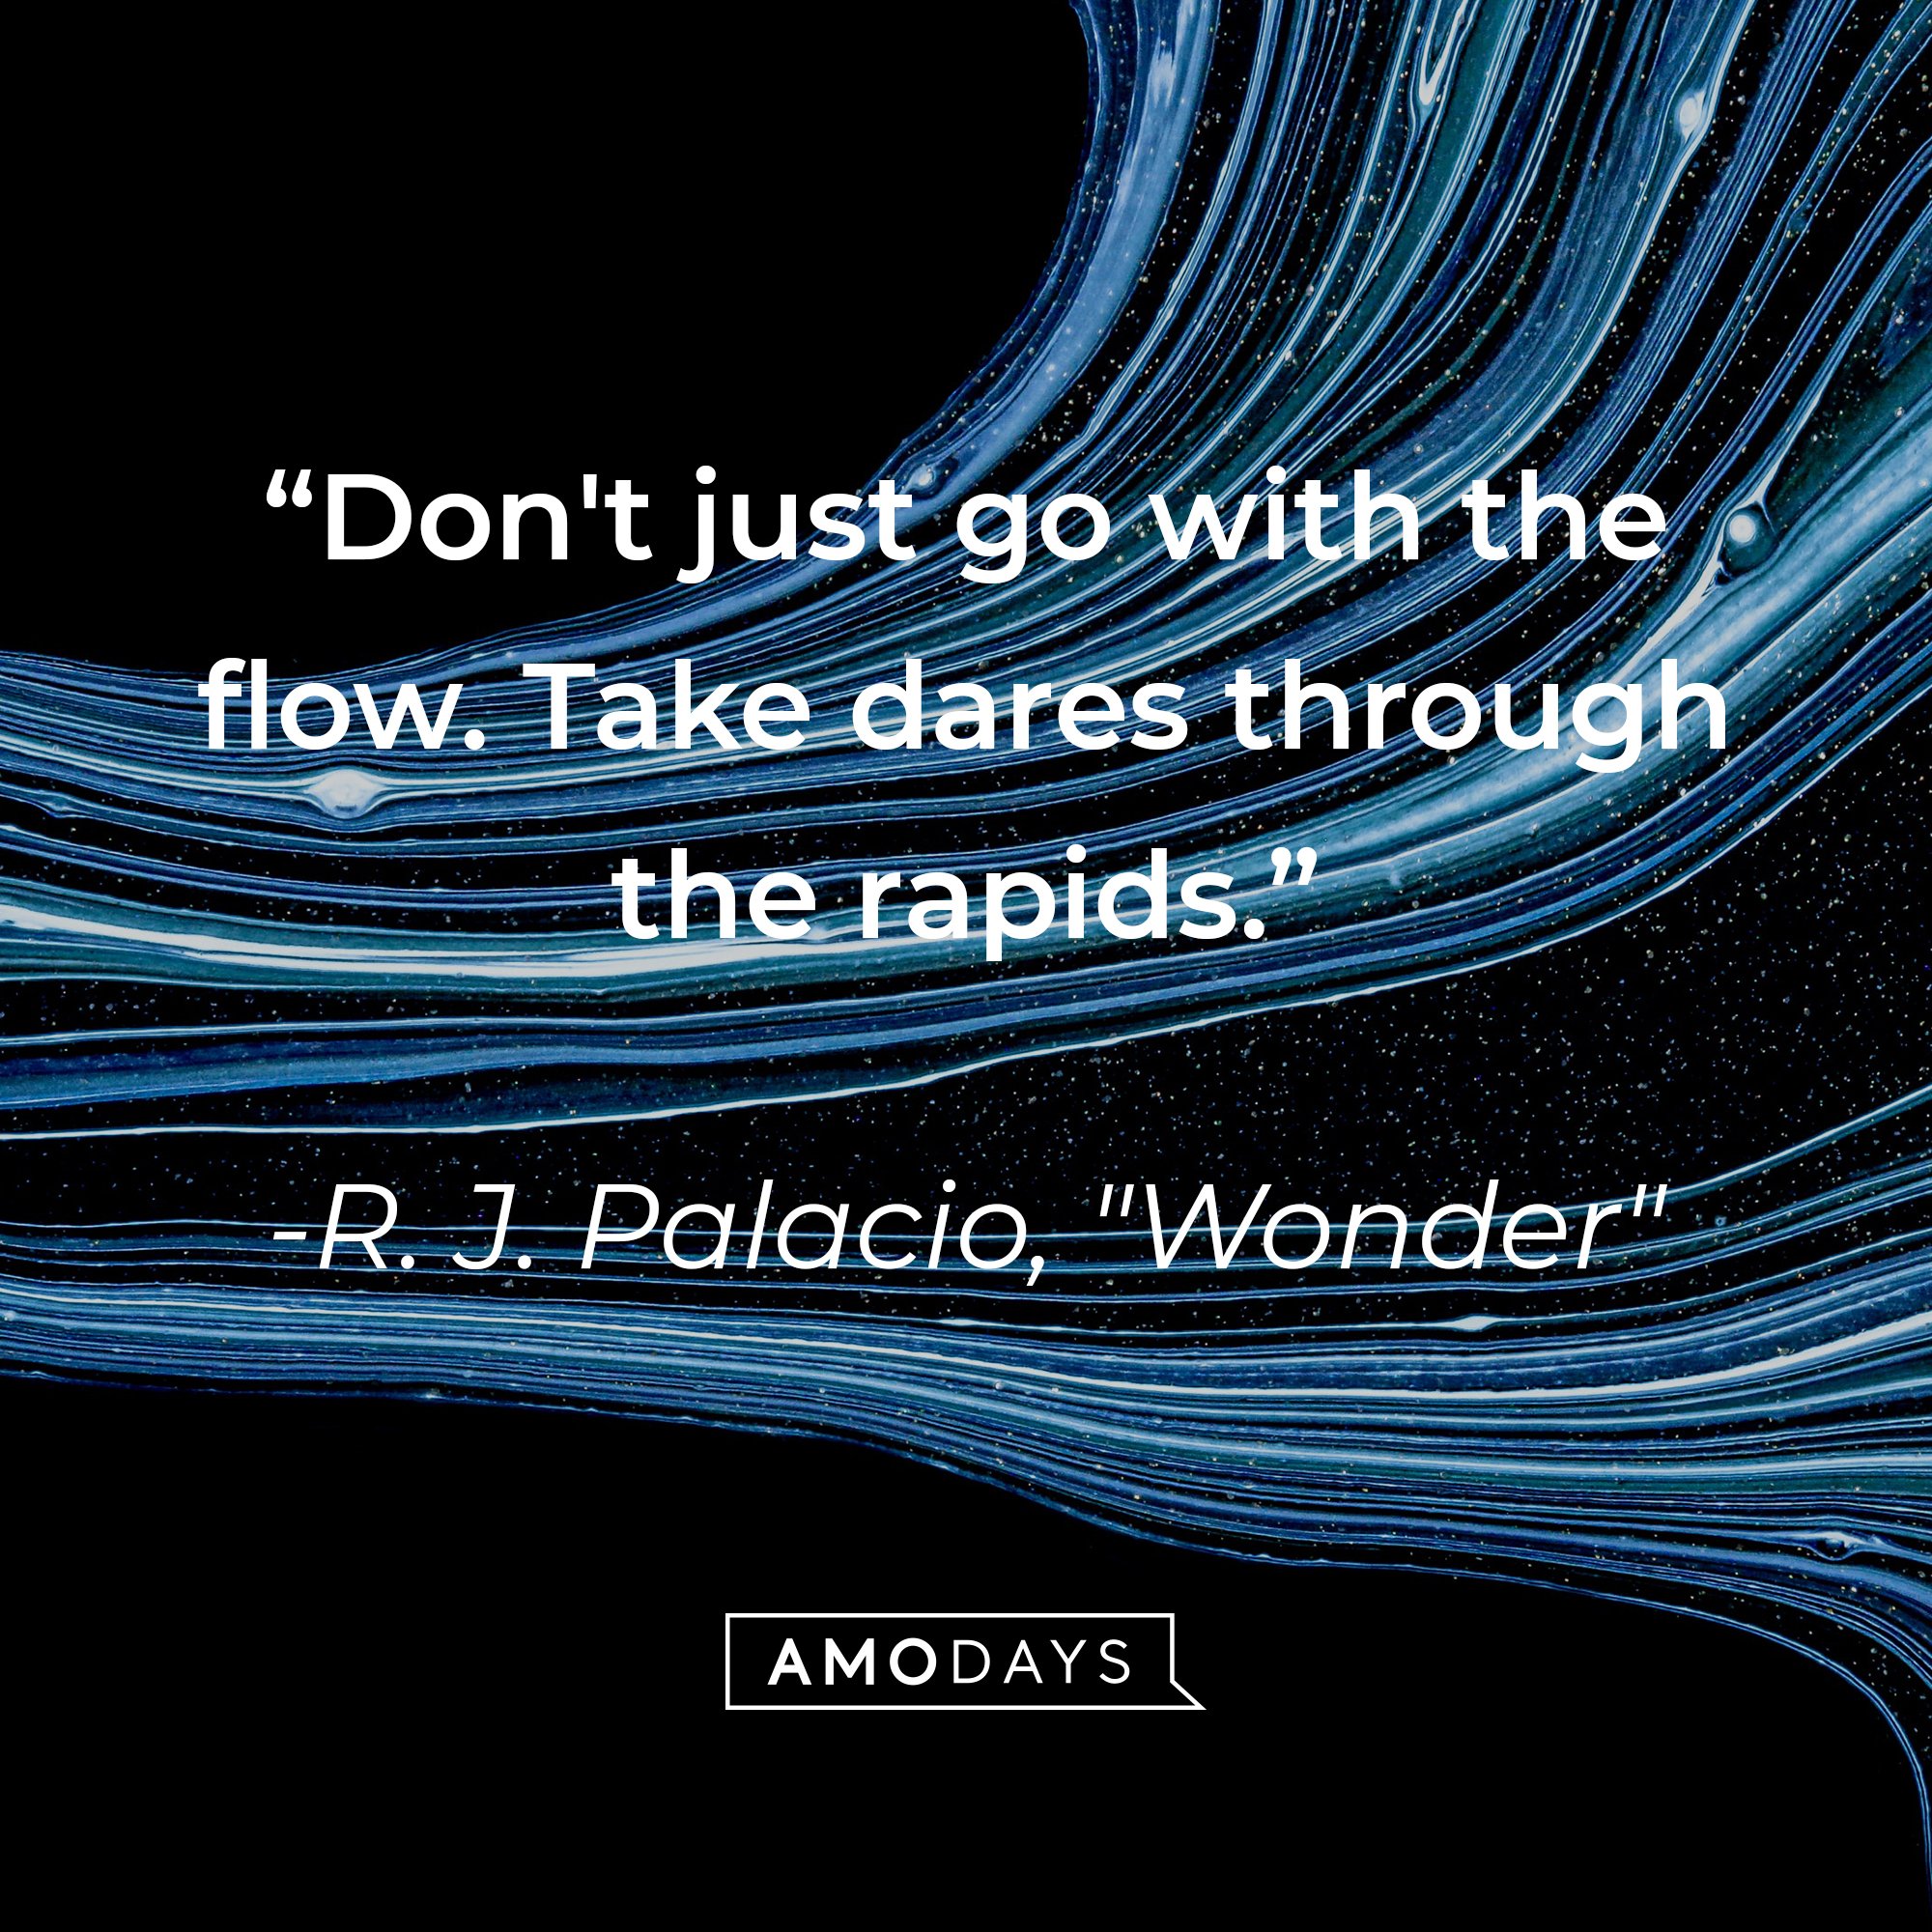 R. J. Palacio's "Wonder" quote: "Don't just go with the flow. Take dares through the rapids." | Image: AmoDays